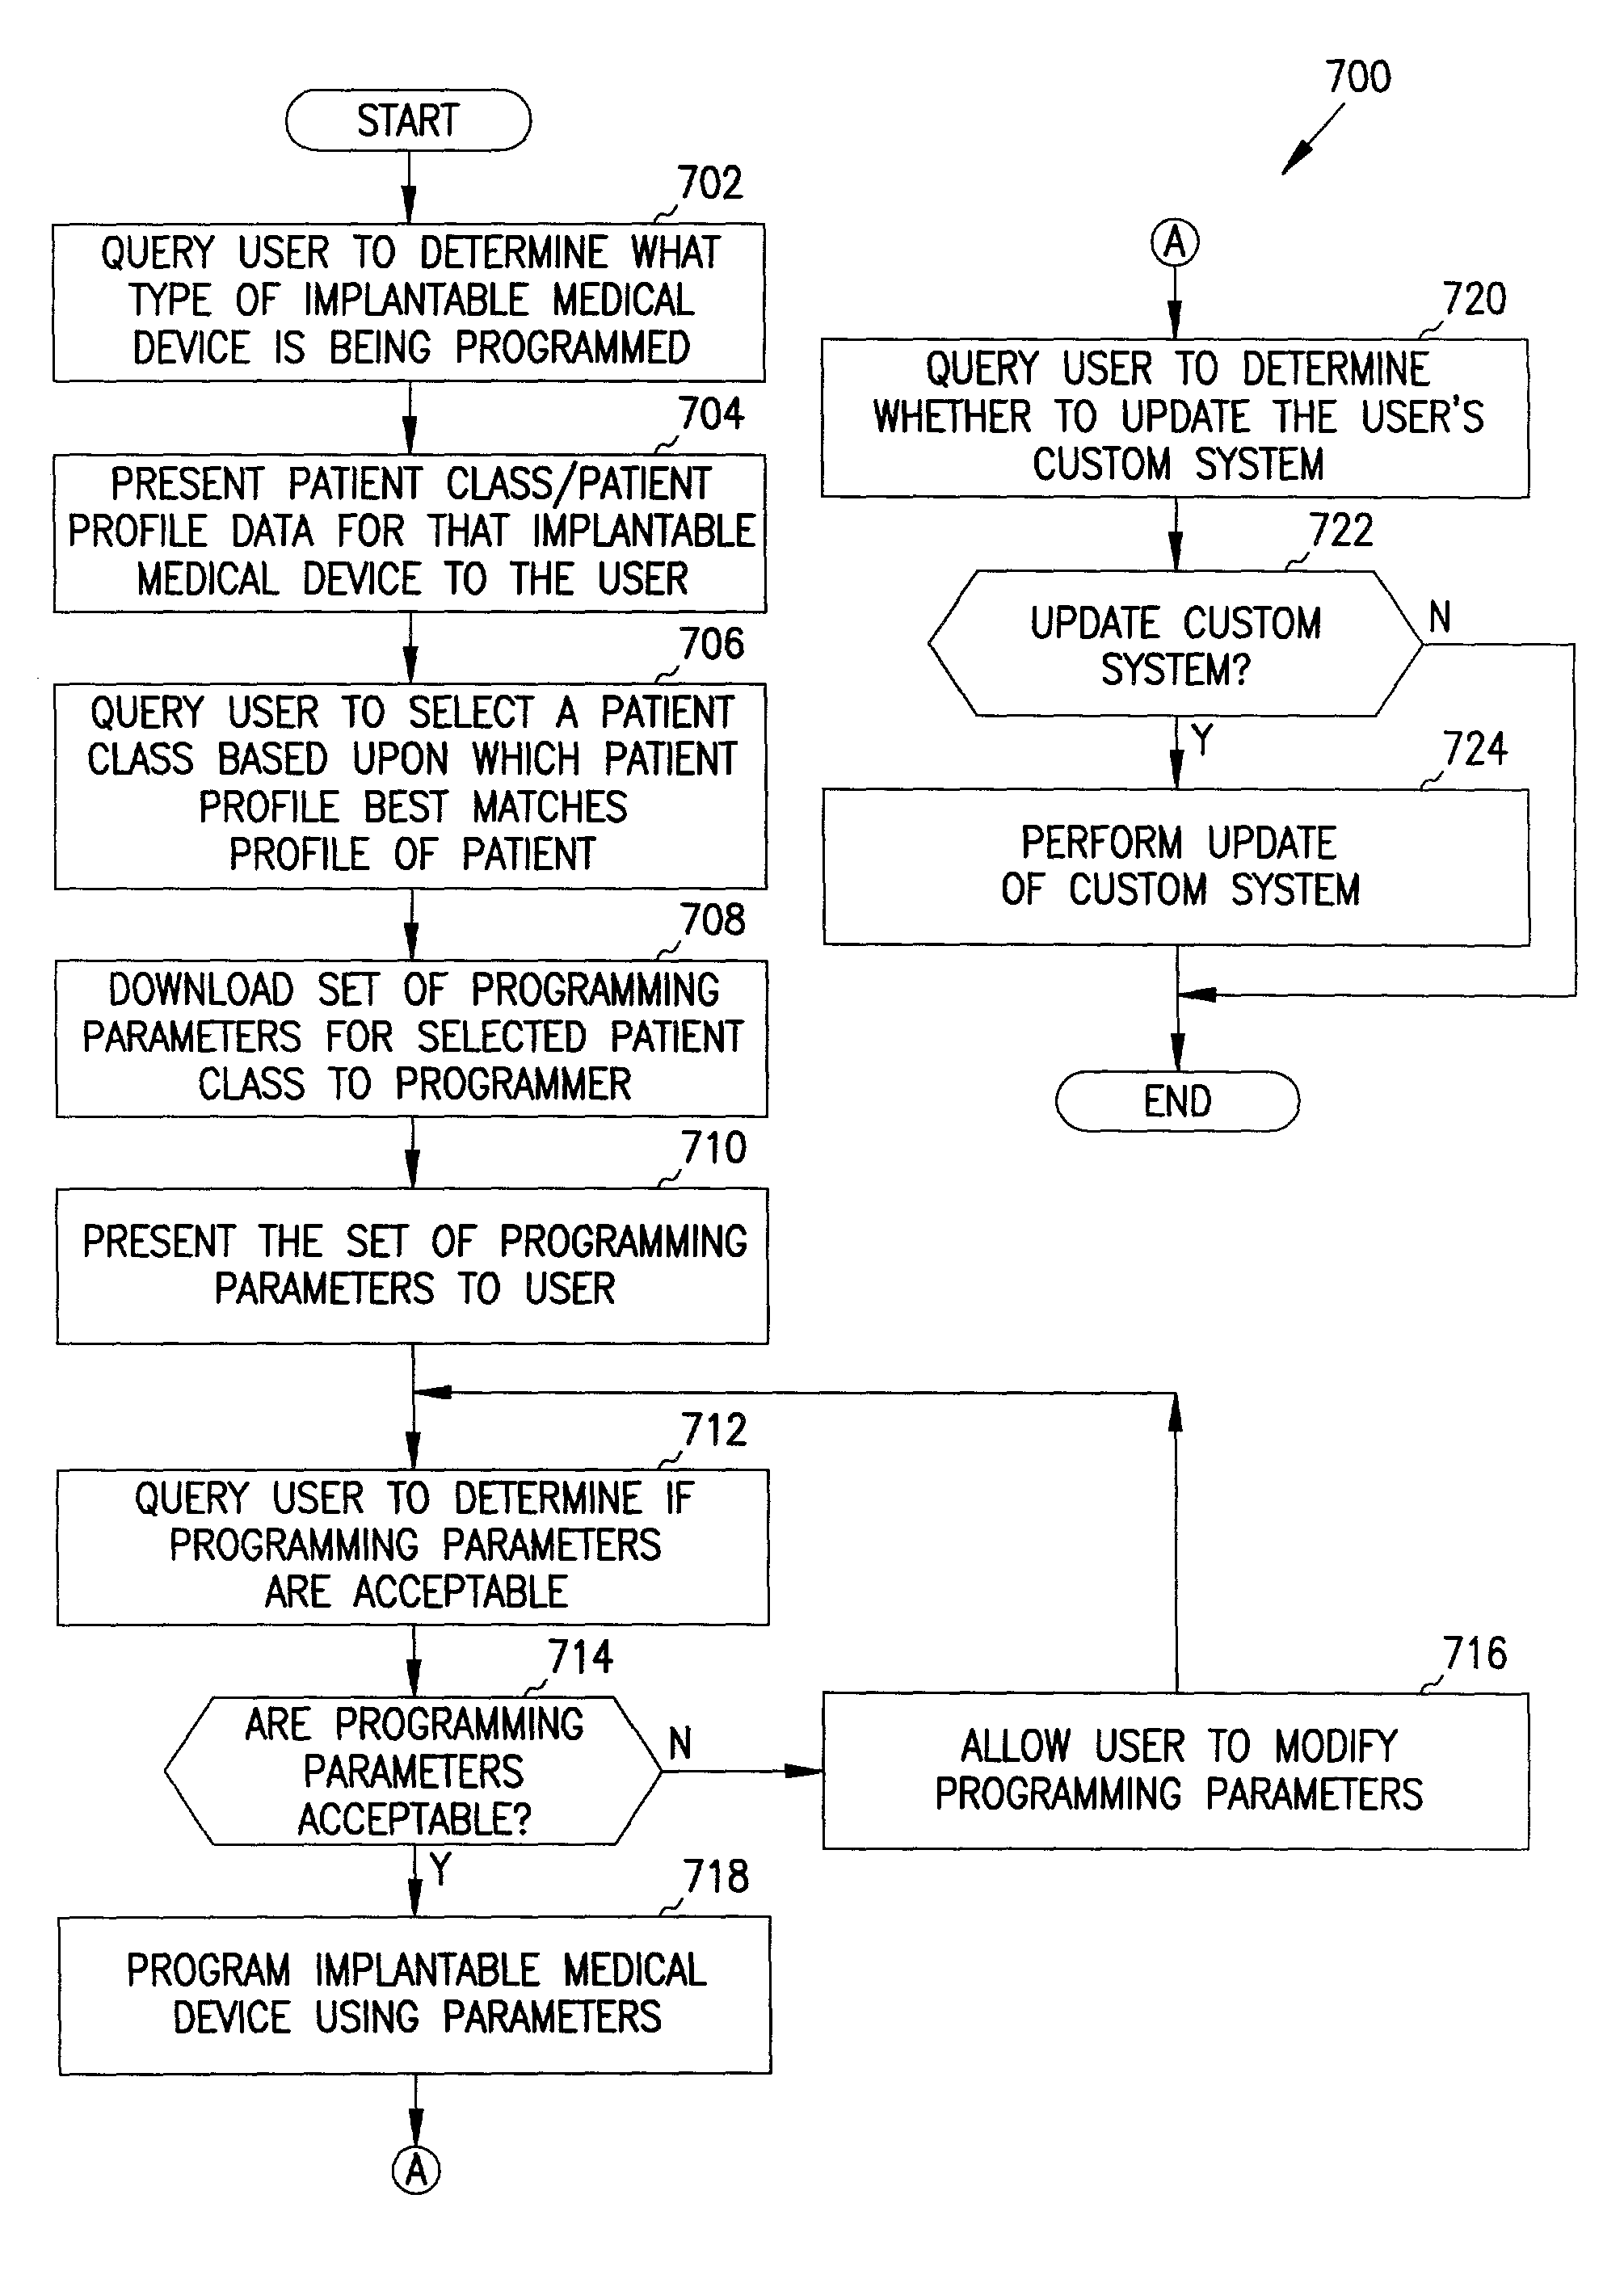 Centralized management system for programmable medical devices